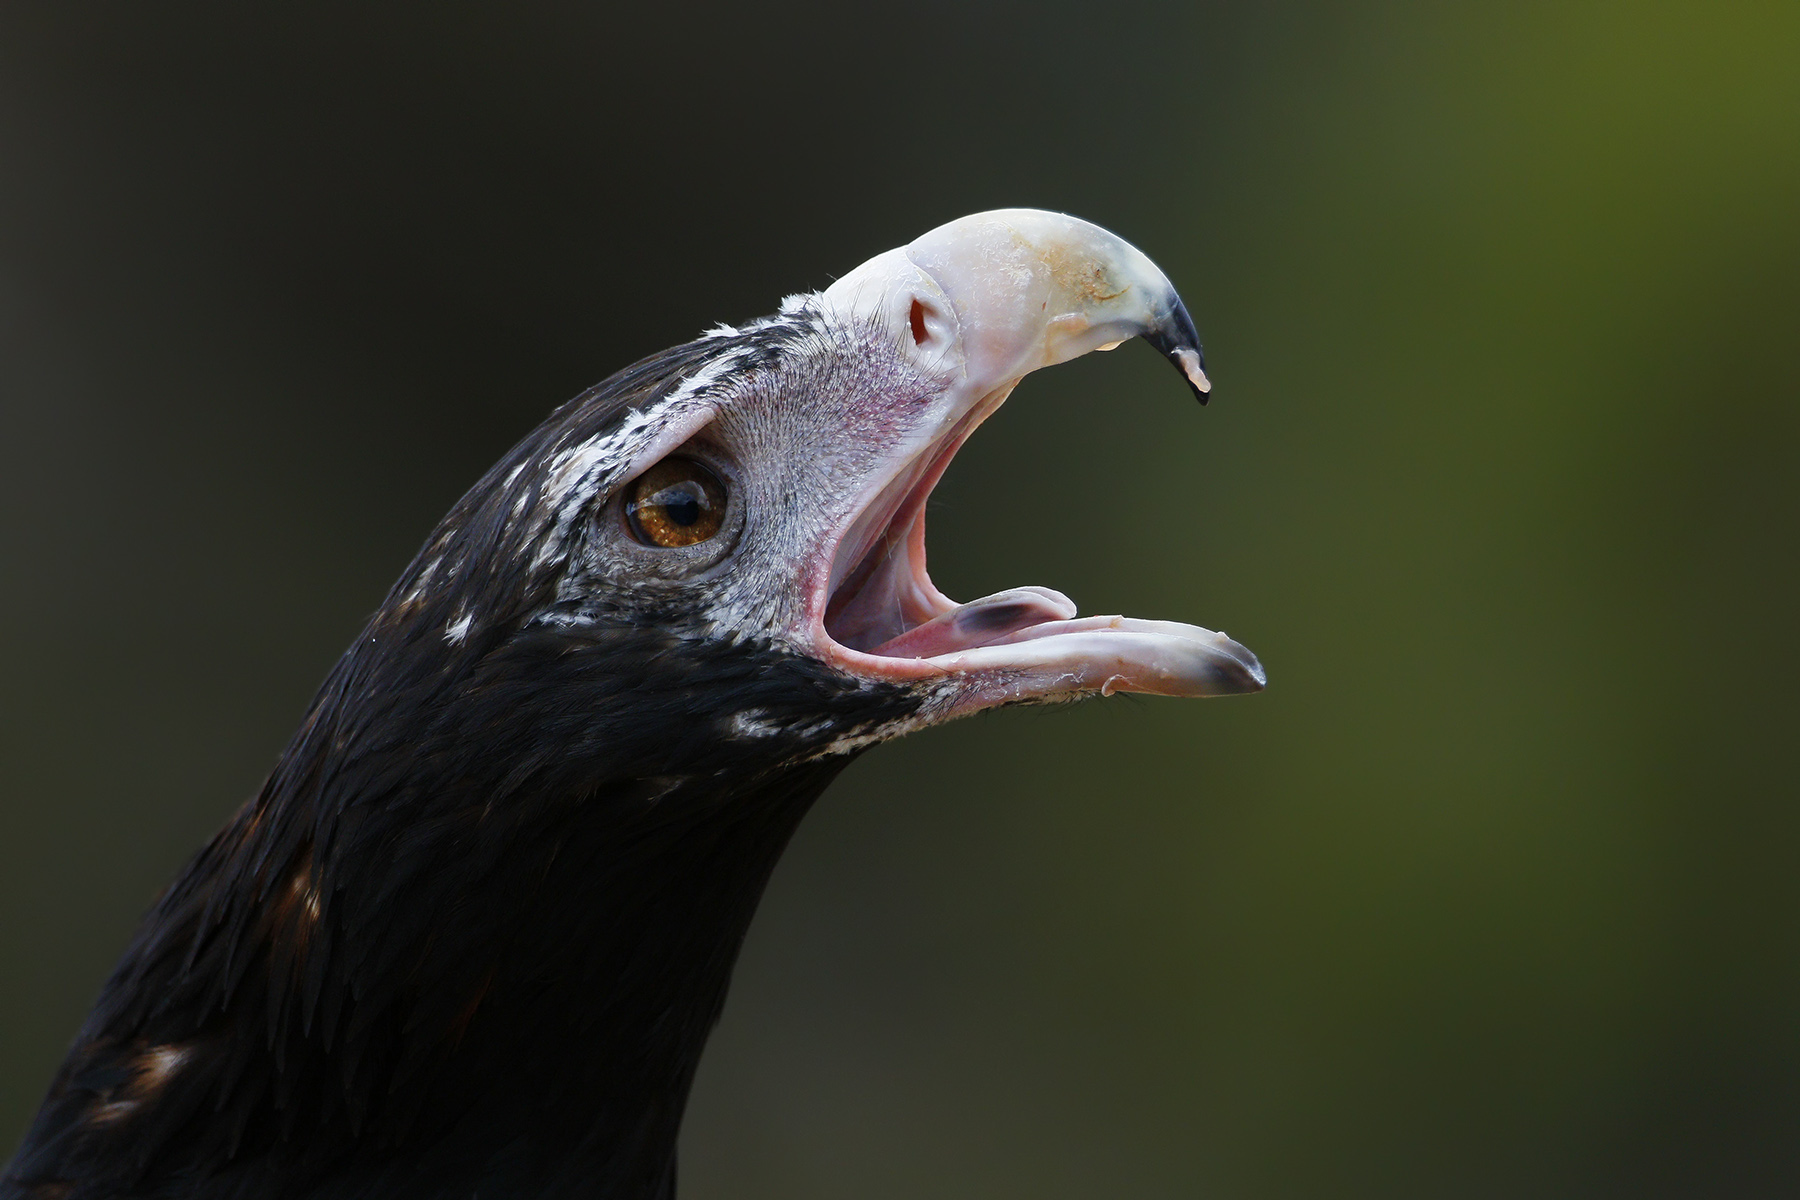 Battle cry: wedge-tailed eagle warns off another bird as it feeds on a rabbit kill